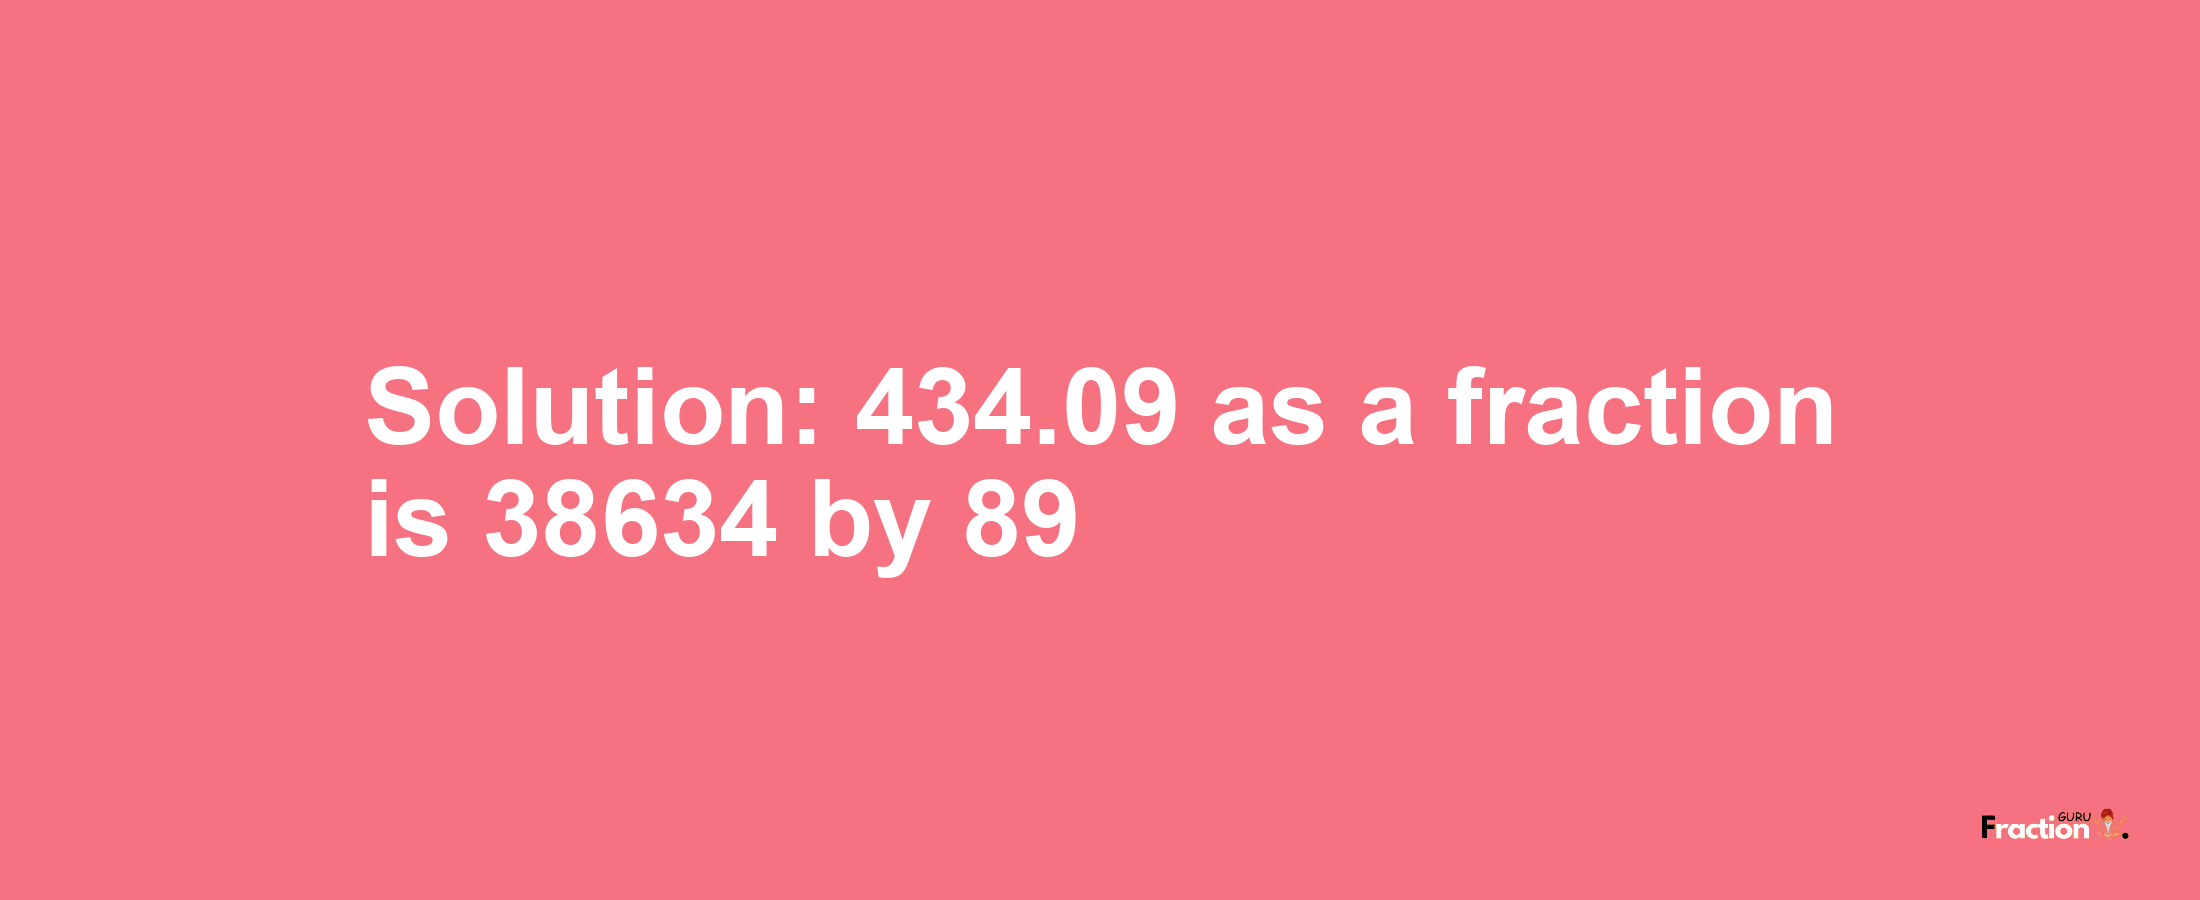 Solution:434.09 as a fraction is 38634/89